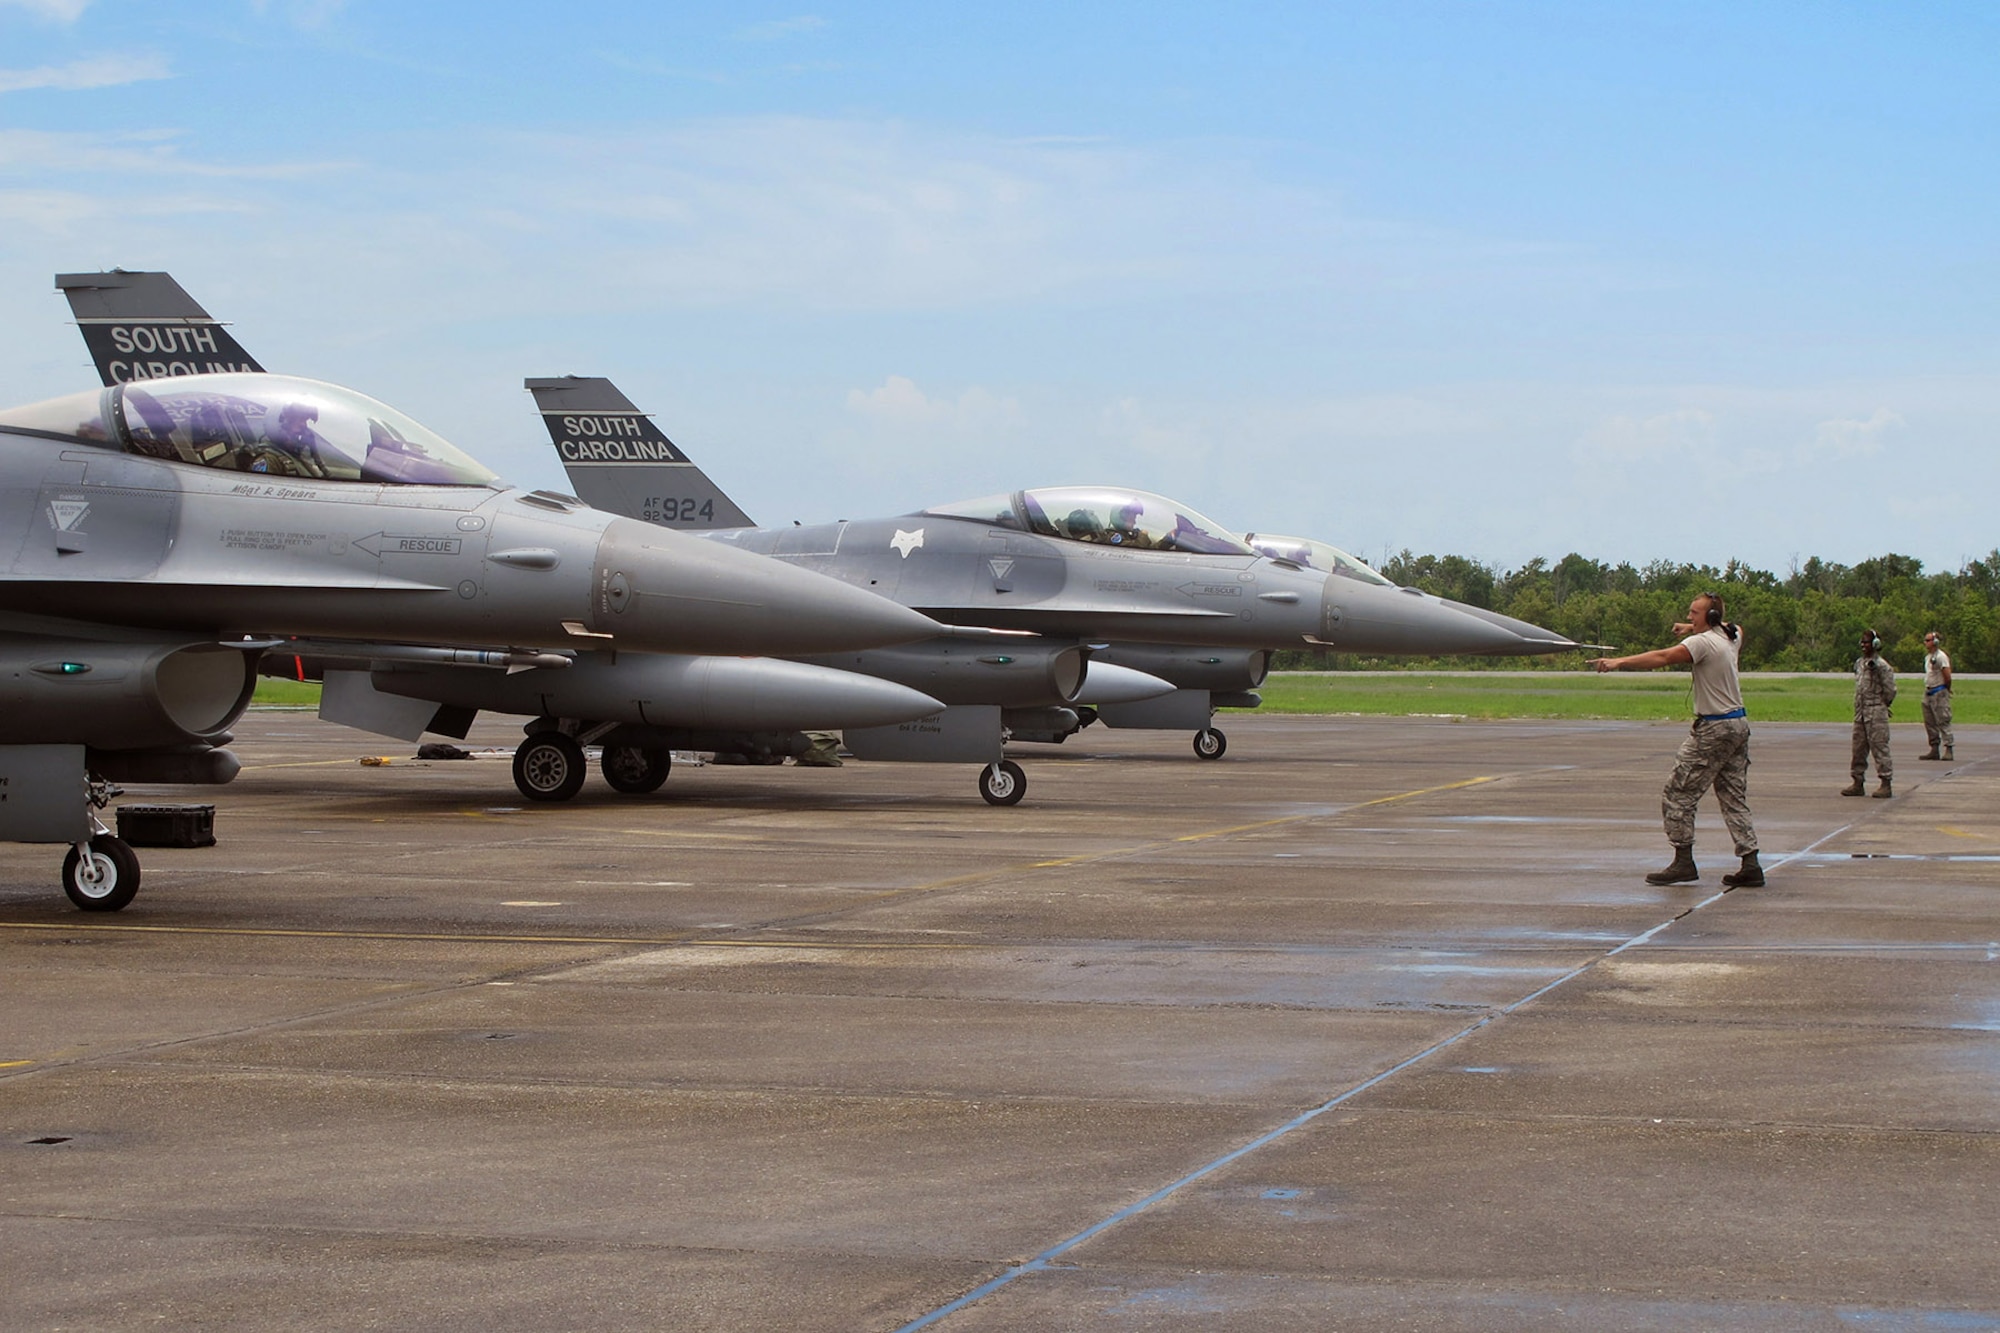 U.S. Air Force Airmen with the South Carolina Air National Guard from McEntire Joint National Guard Base, S.C., conduct flight line activities during an F-16 Fighting Falcon training mission at the Naval Air Station Joint Reserve Base New Orleans, La., June 20, 2013.   (U.S. Air National Guard photo by 157th Fighter Squadron Unit Public Affairs Representative/Released)